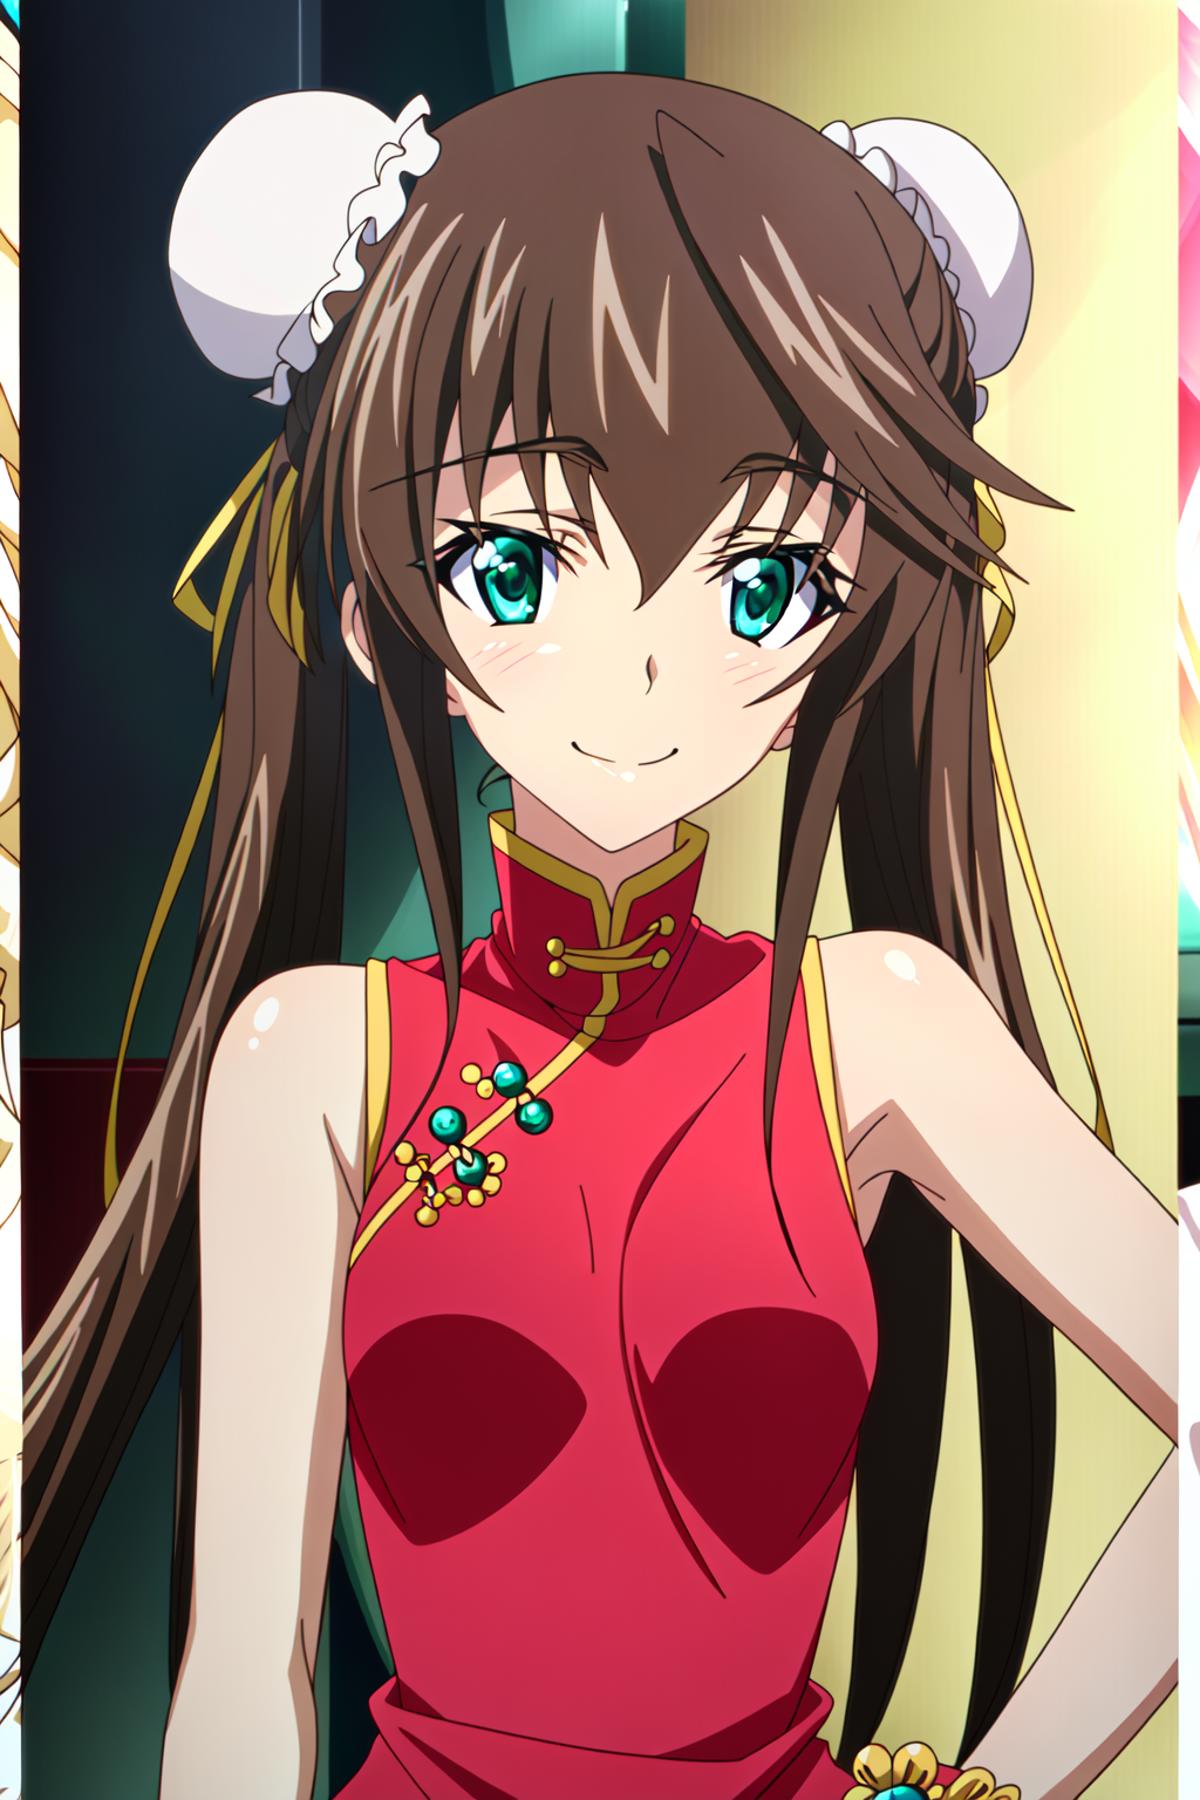 Huang "Rin" Lingyin | Infinite Stratos image by OG_Turles